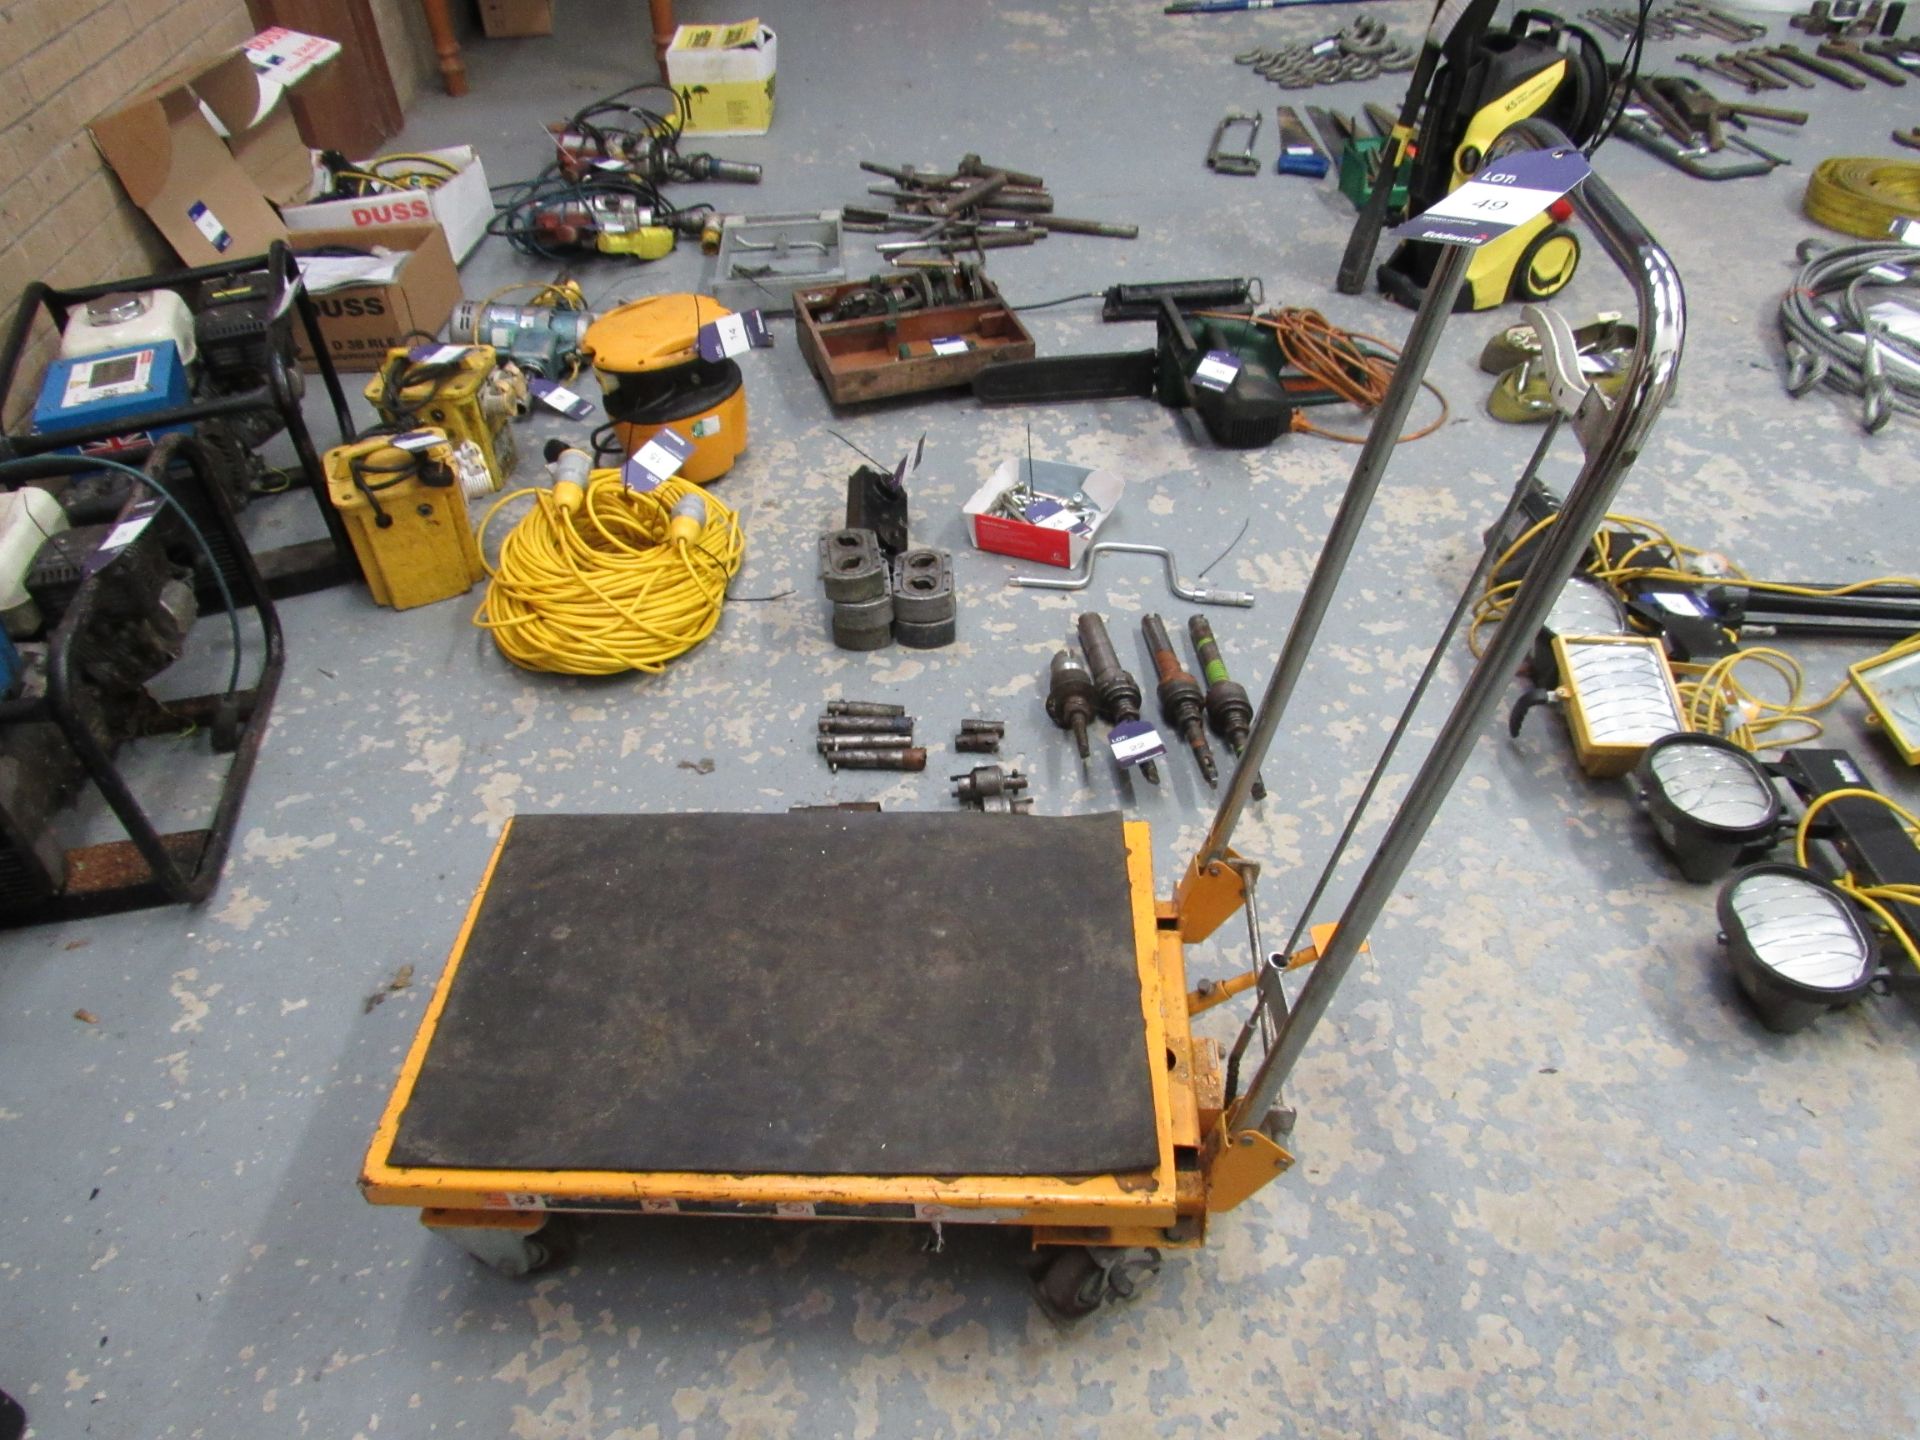 Hydraulic foot pump adjustable height mobile cart - Image 2 of 2